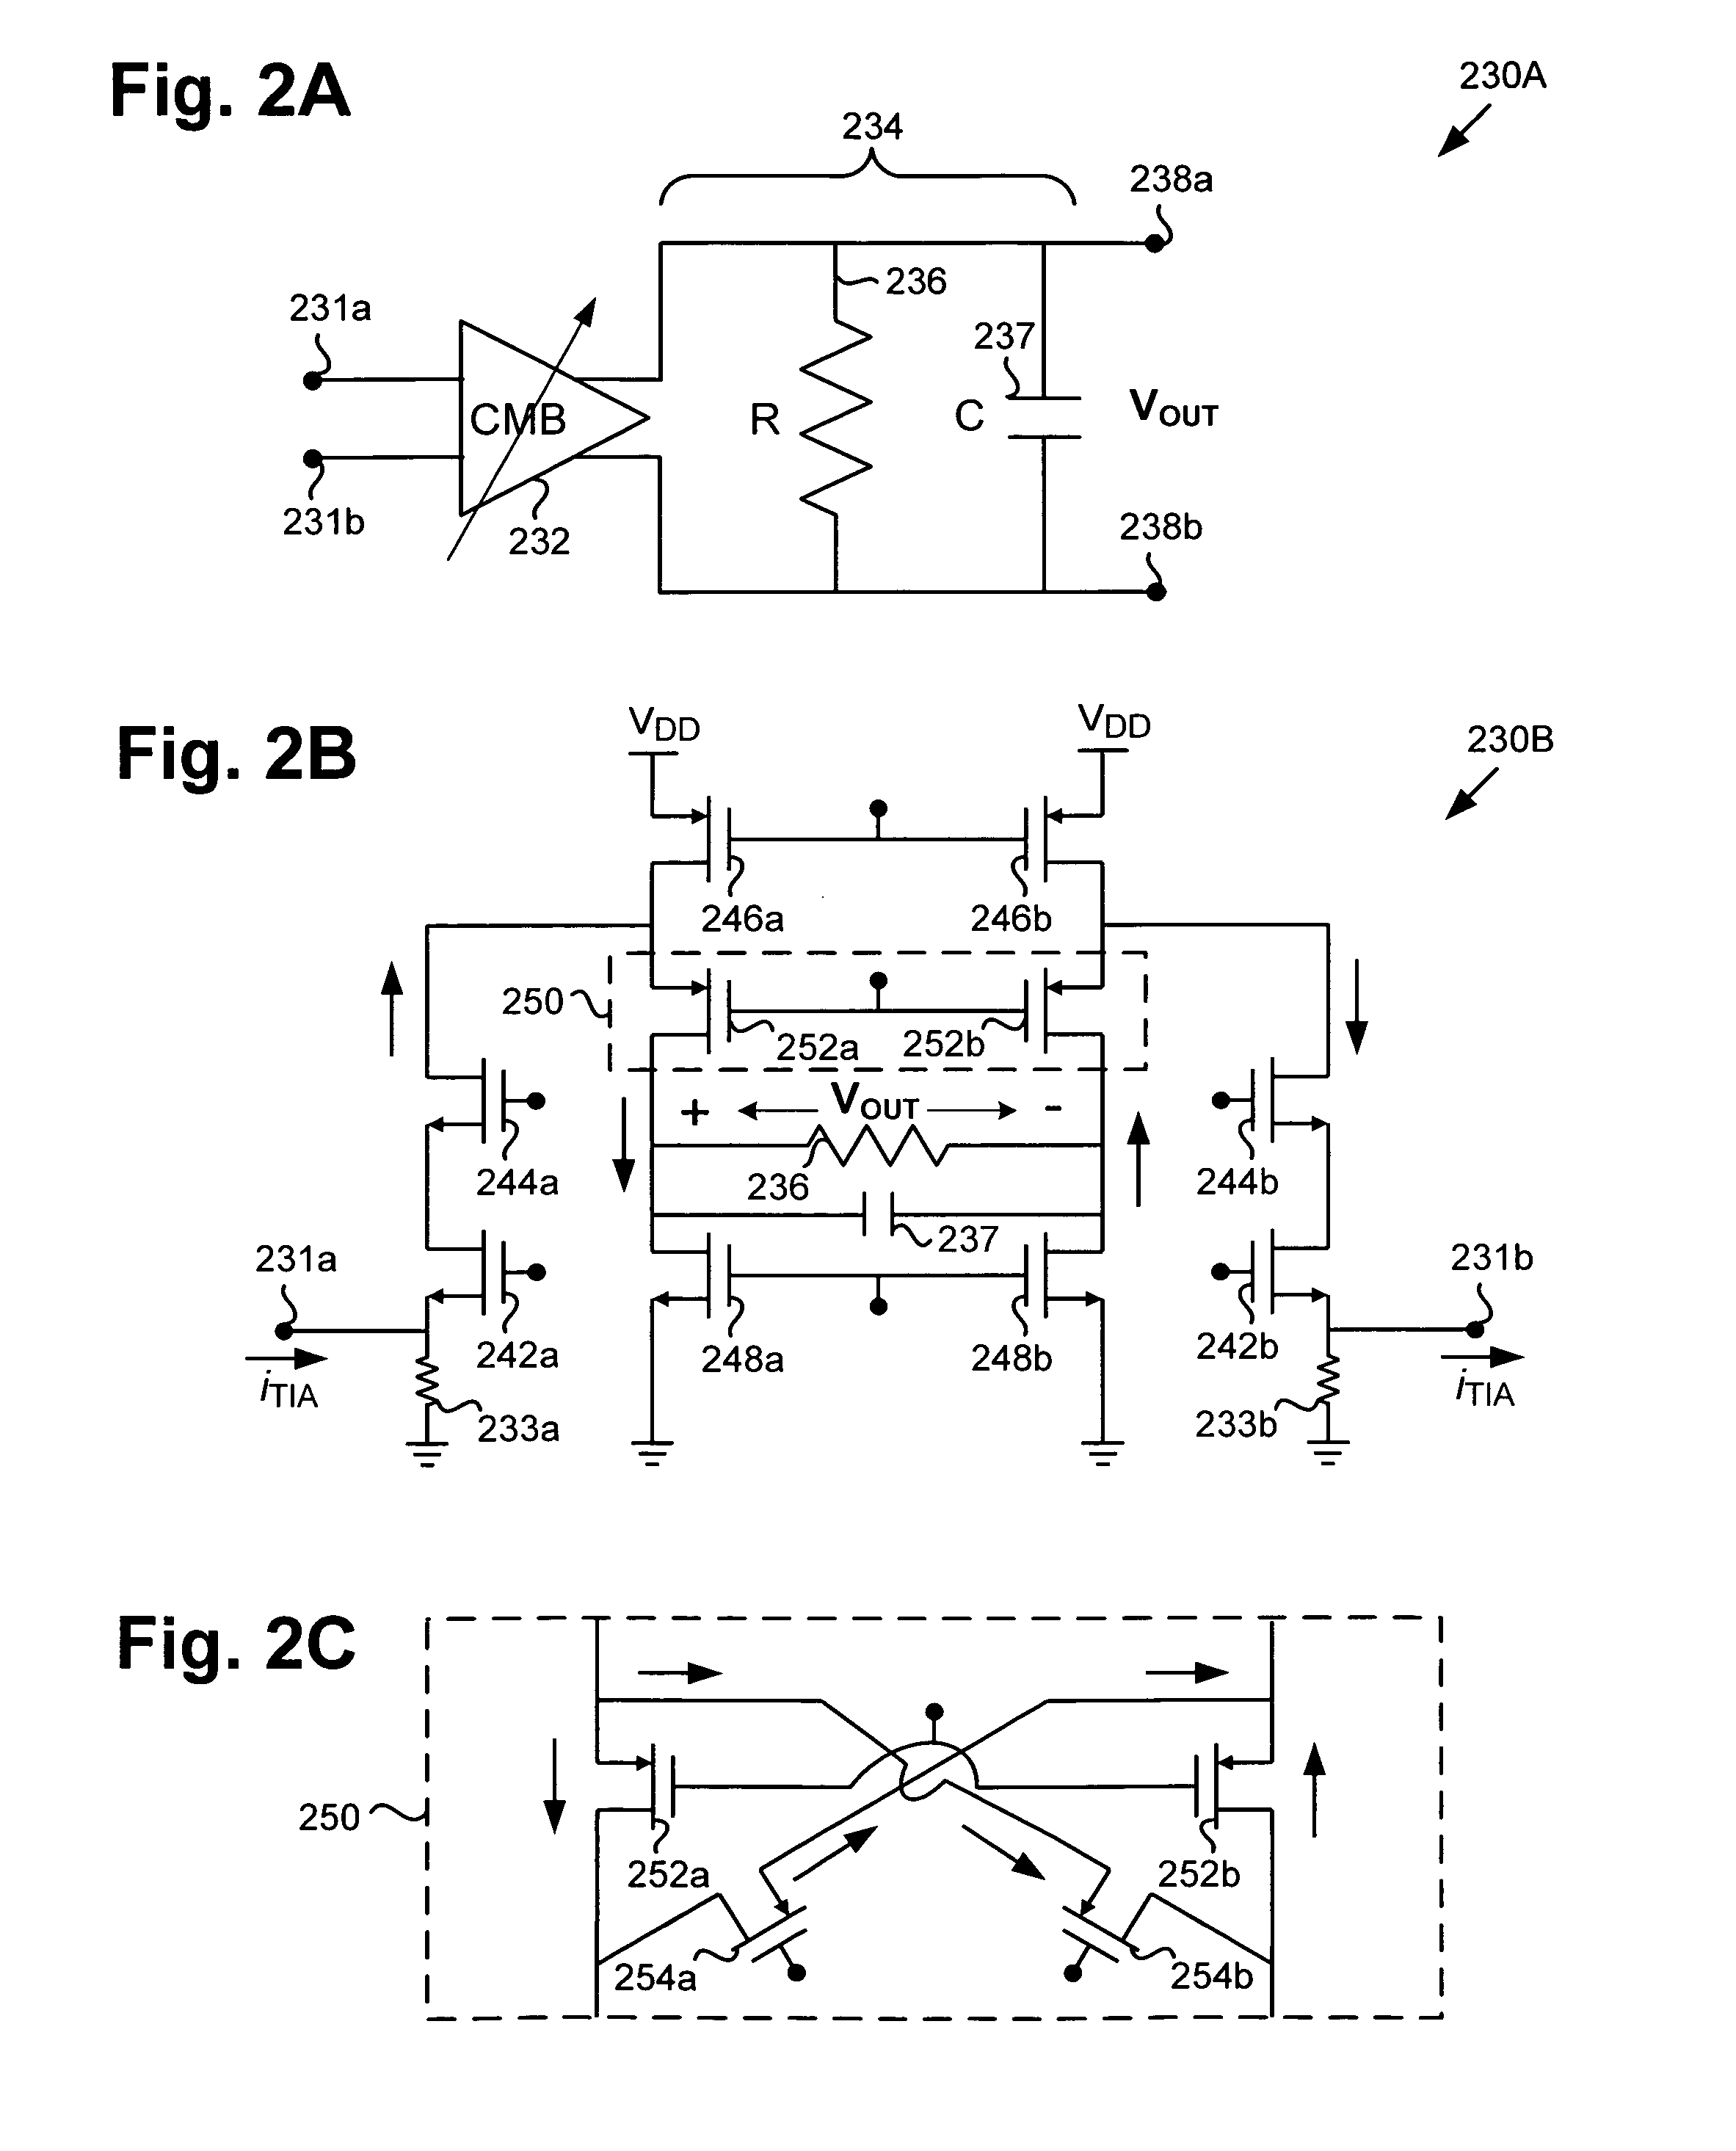 Compact low-power receiver including transimpedance amplifier, digitally controlled interface circuit, and low pass filter